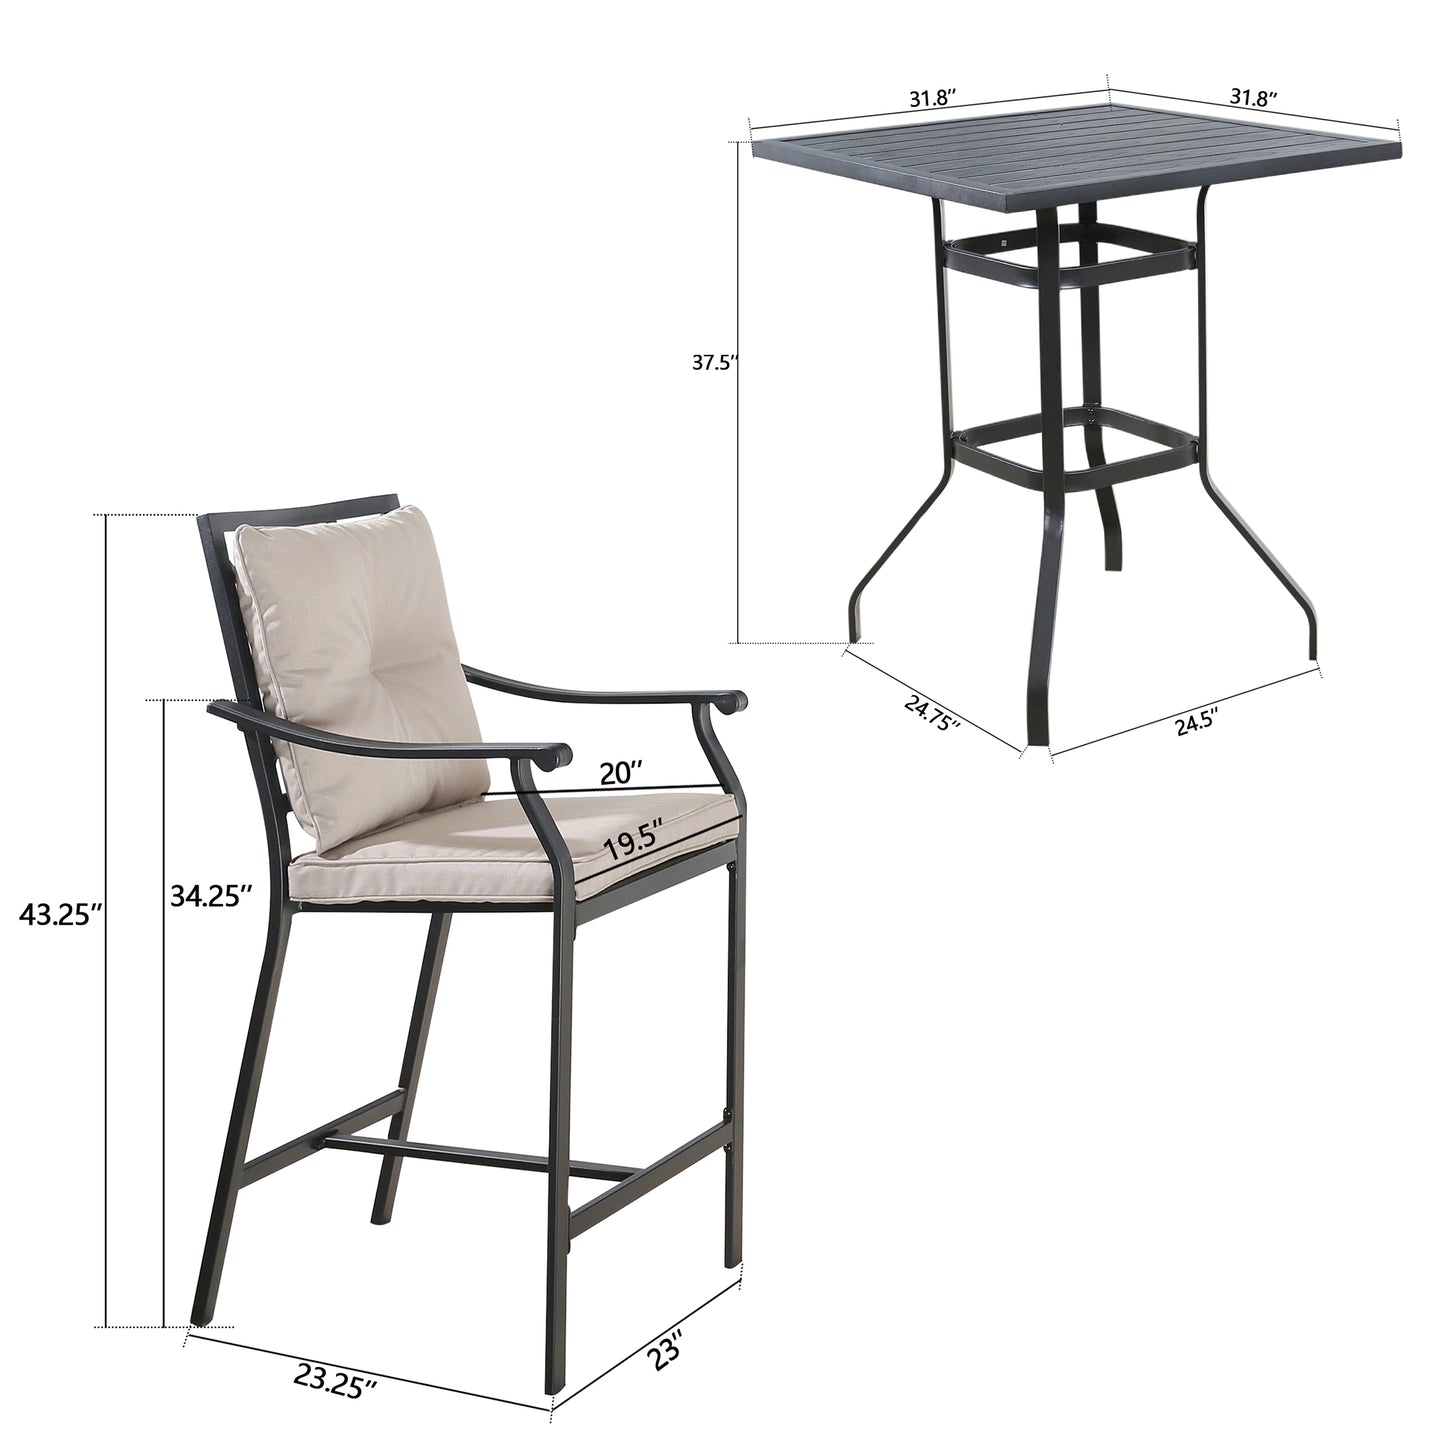 Outdoor 5 Pieces Patio Bar Height Dining Set with Square Steel Table and Bar Stools with Beige Seat and Back Cushions